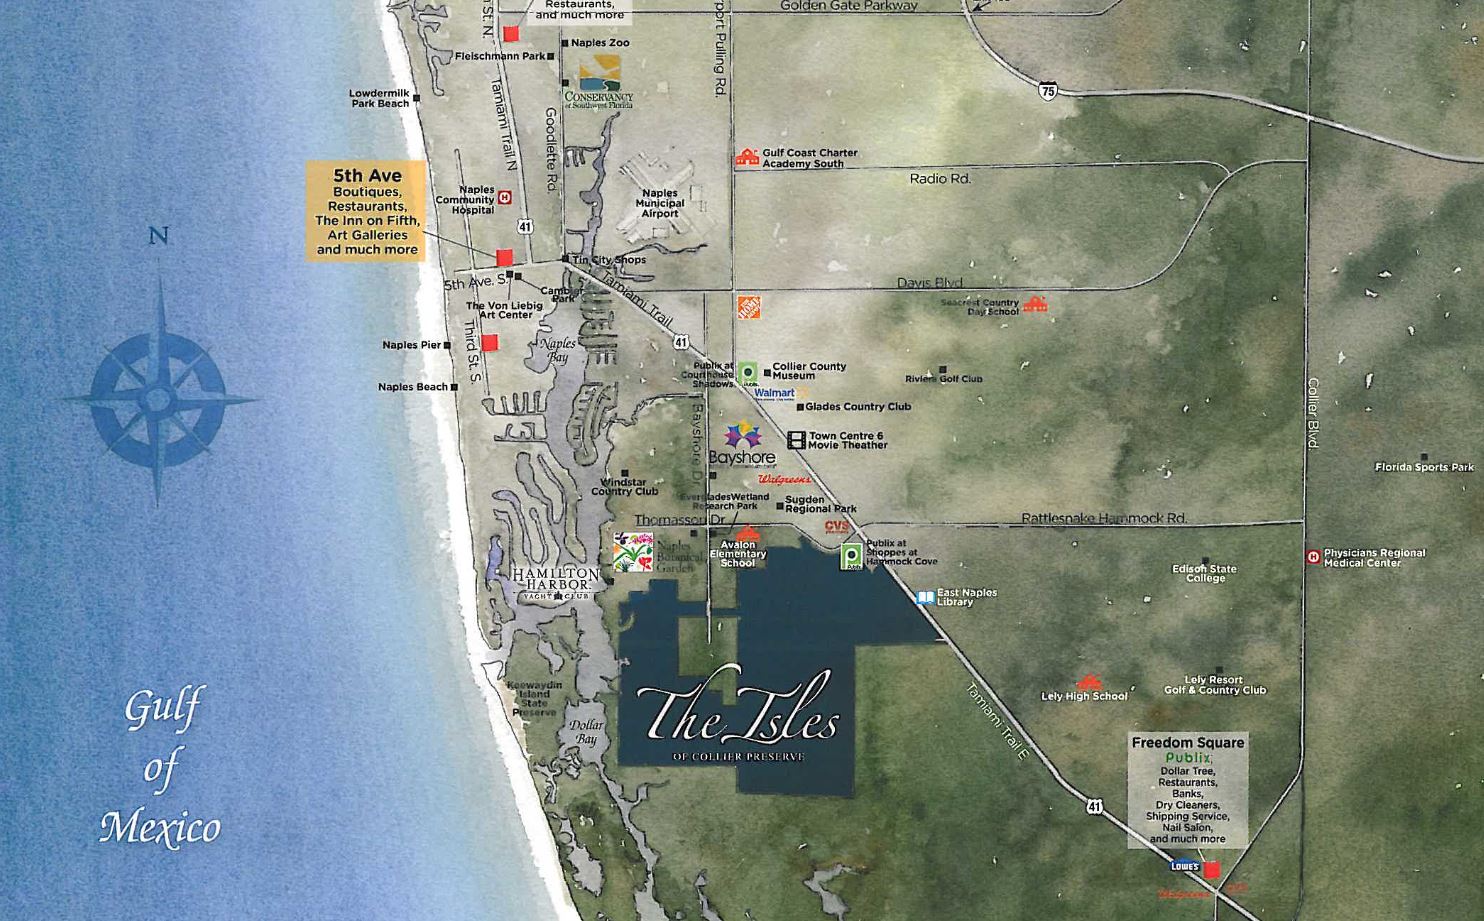 Map of the The Isles of Collier Preserve in Naples, Florida.